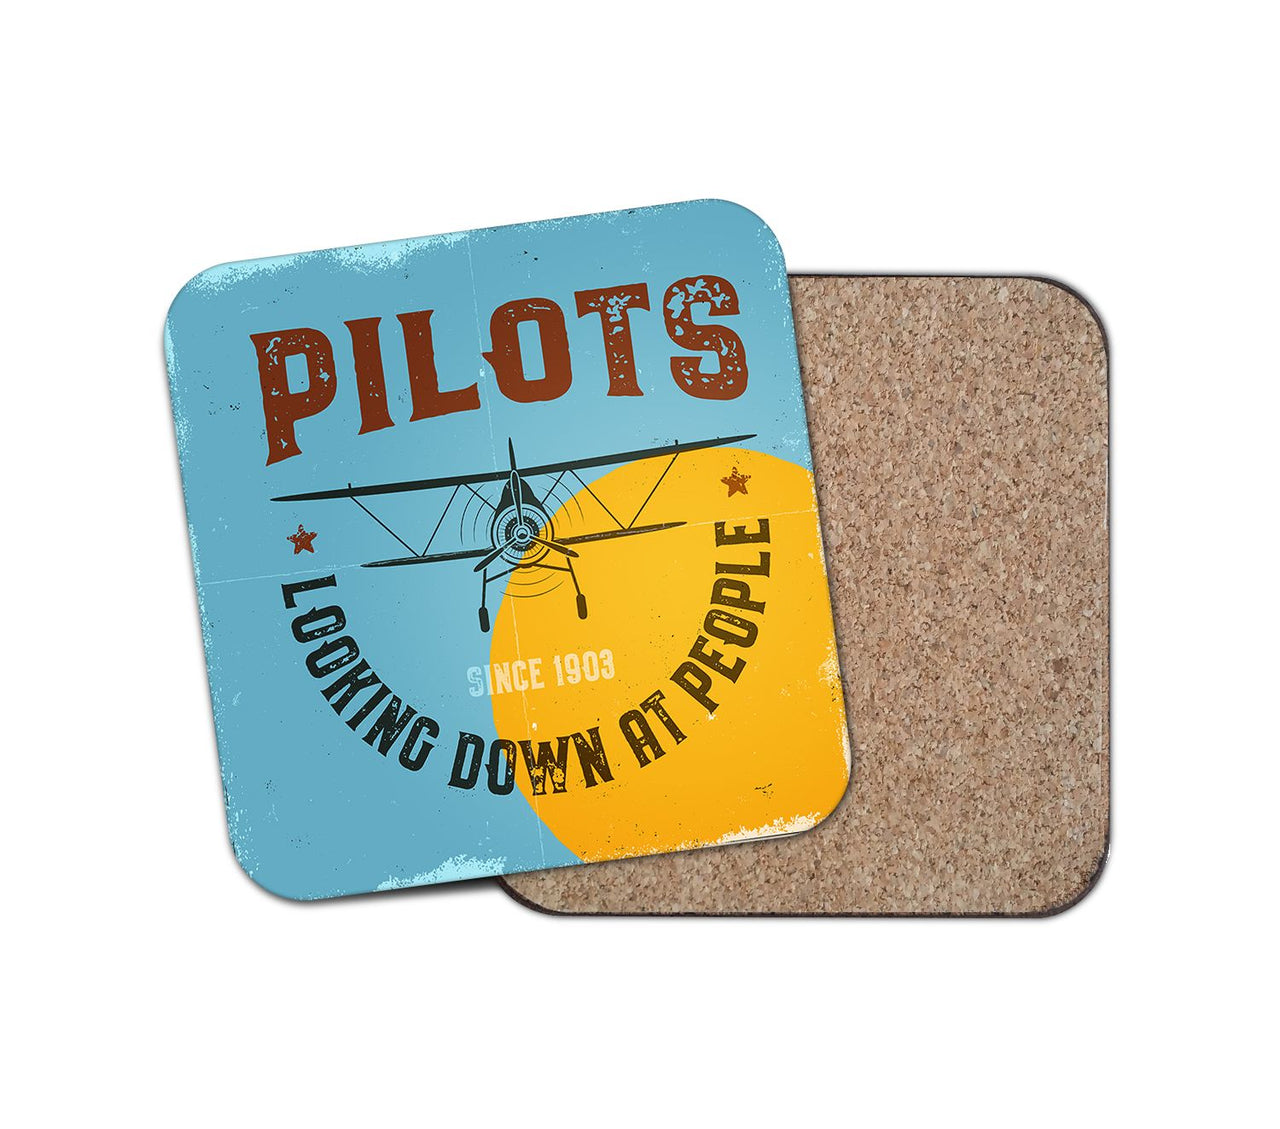 Pilots Looking Down at People Since 1903 Designed Coasters